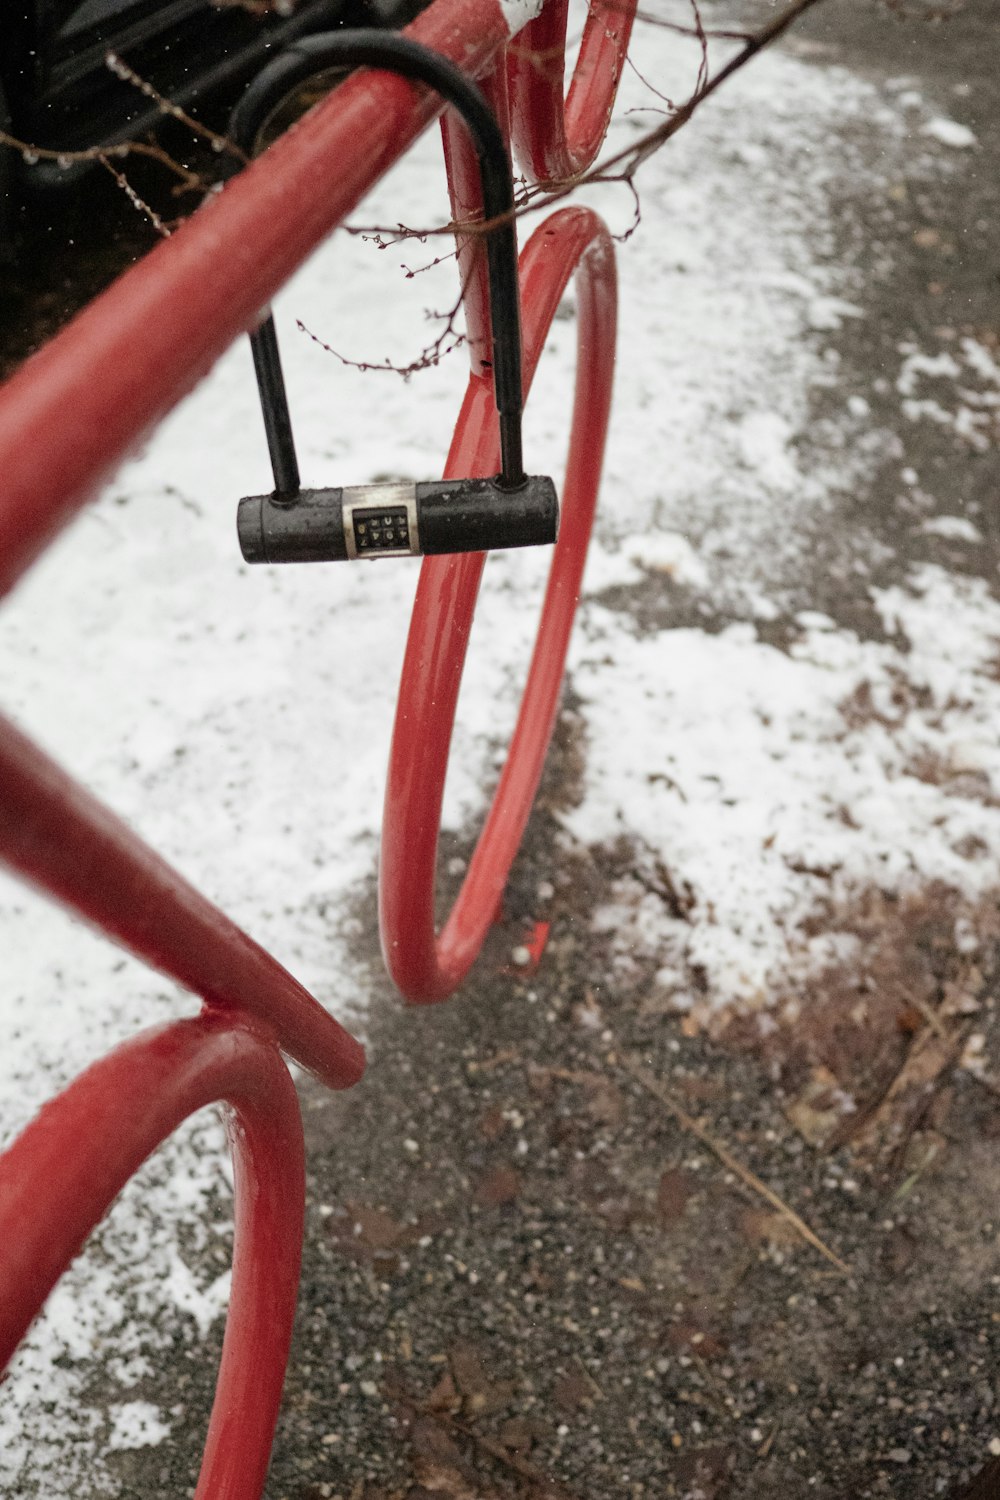 a close up of a red bike with snow on the ground